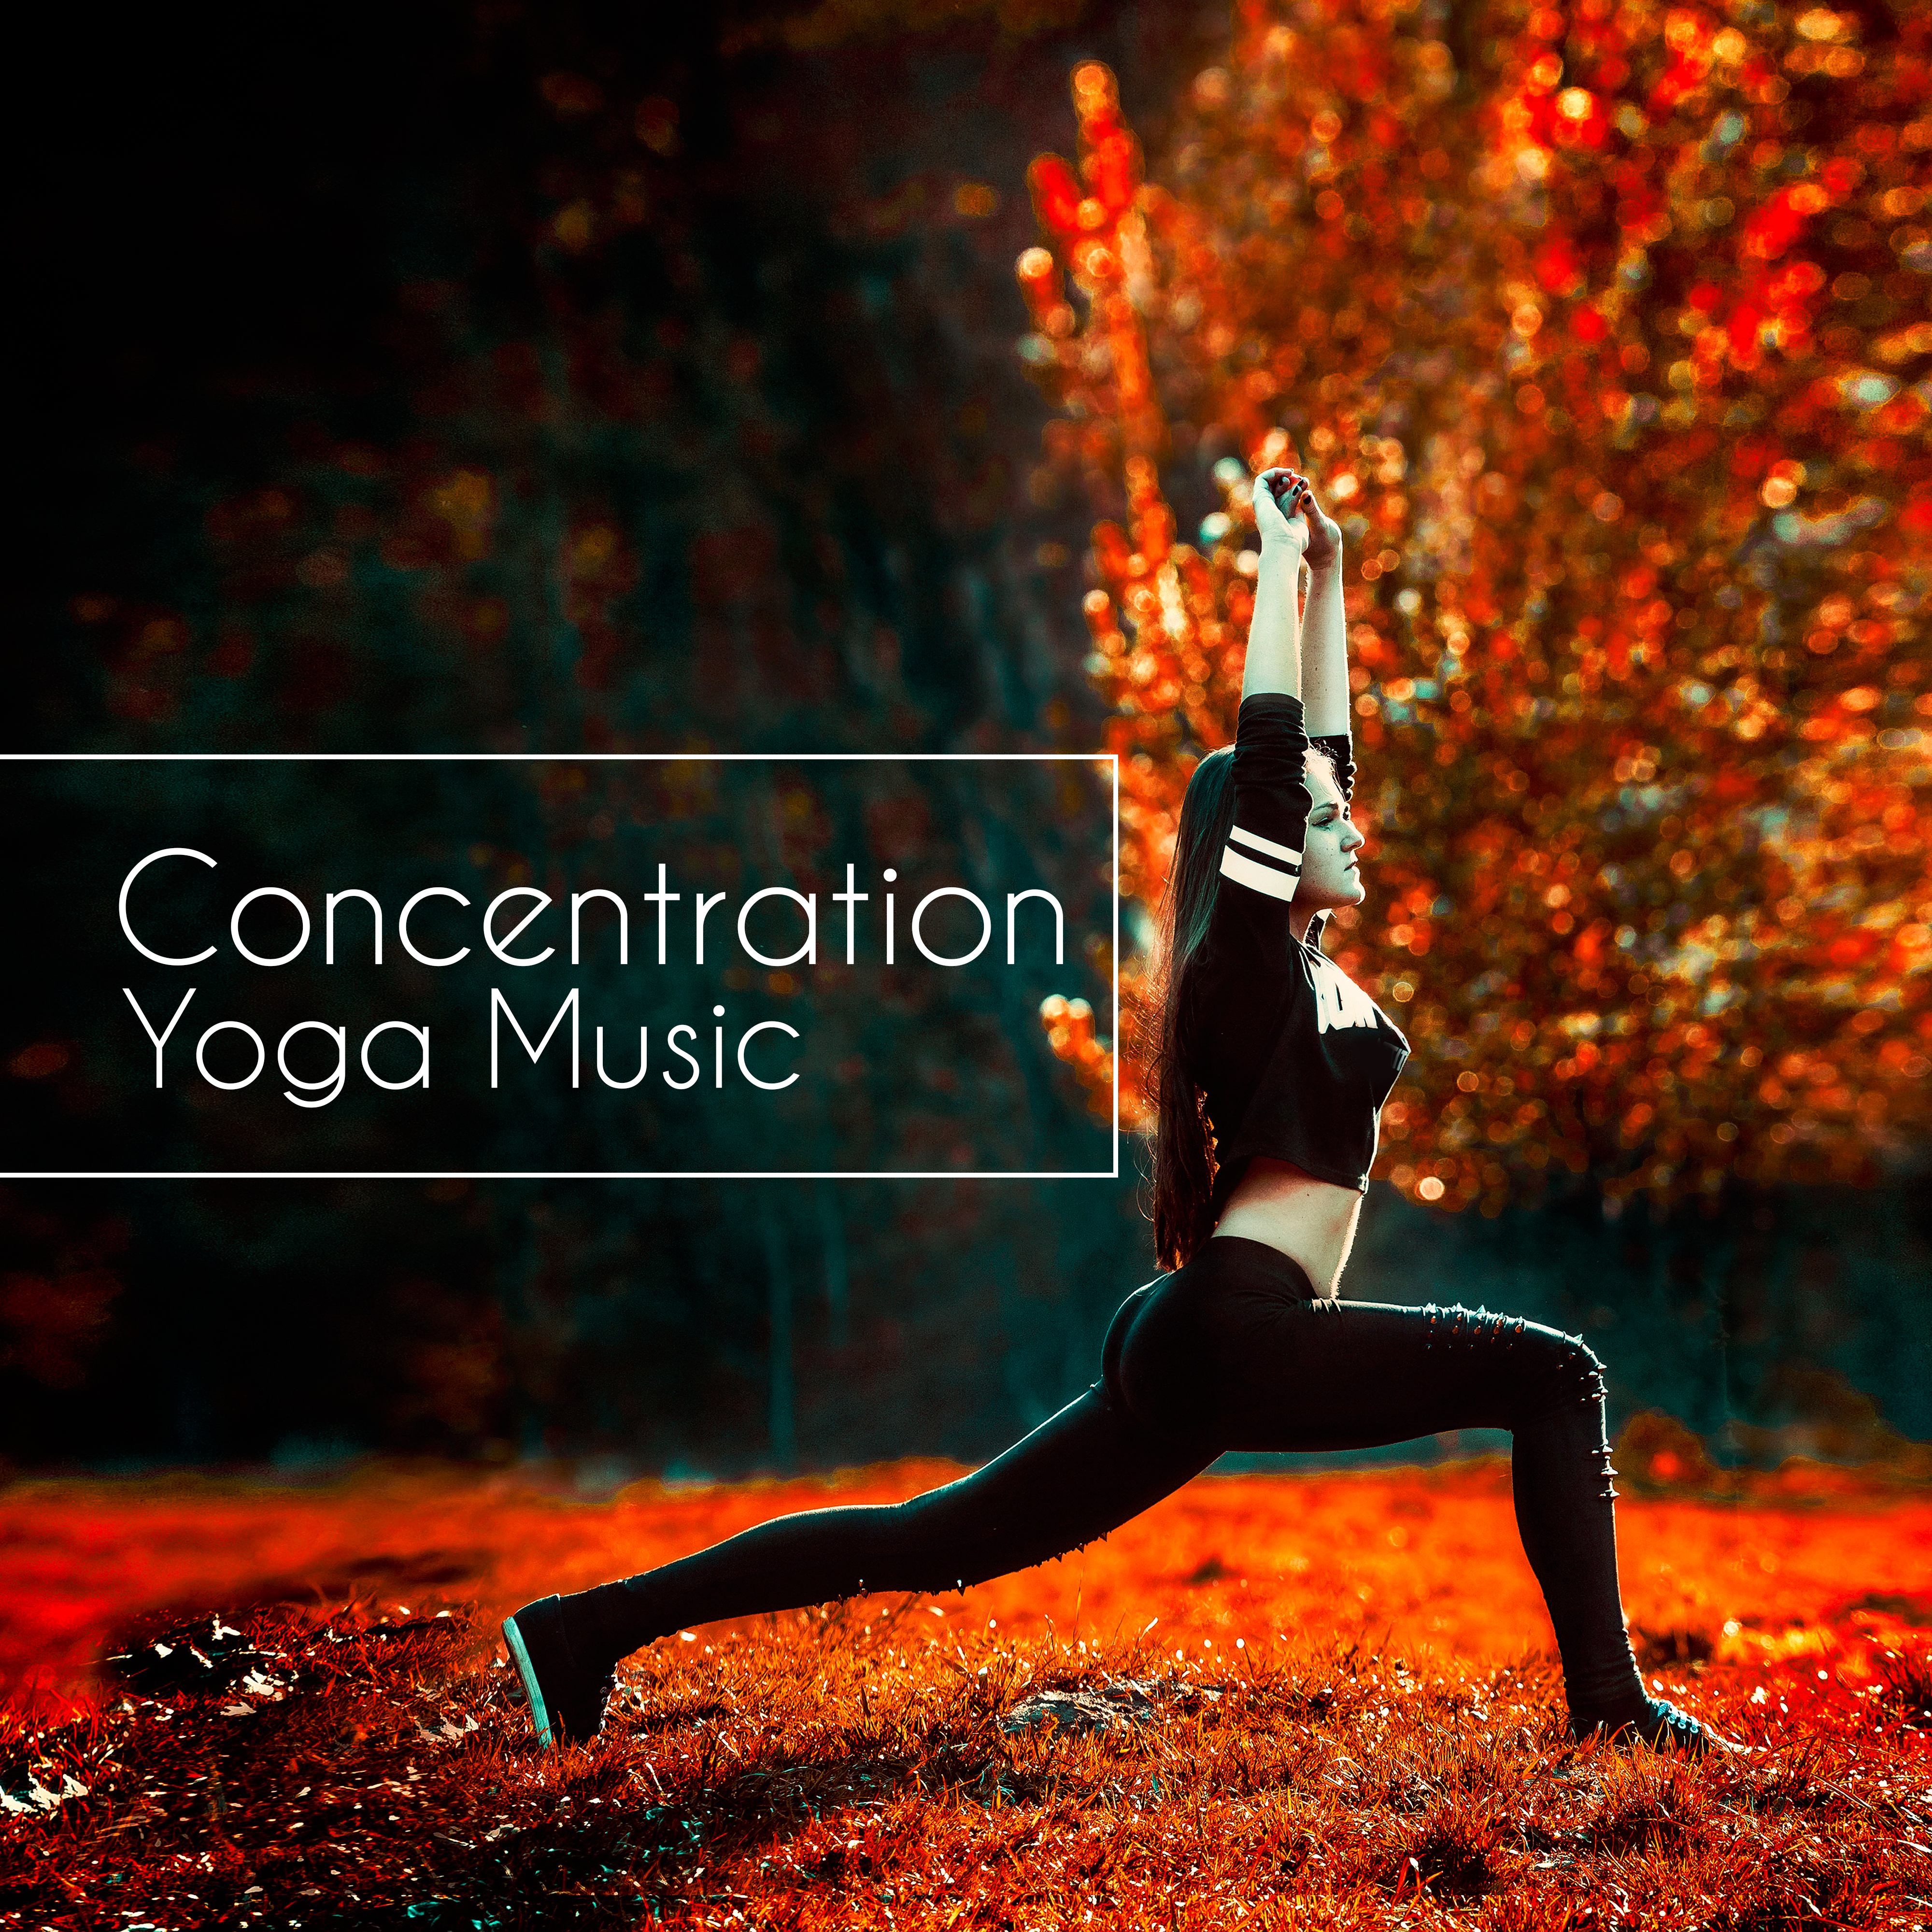 Concentration Yoga Music